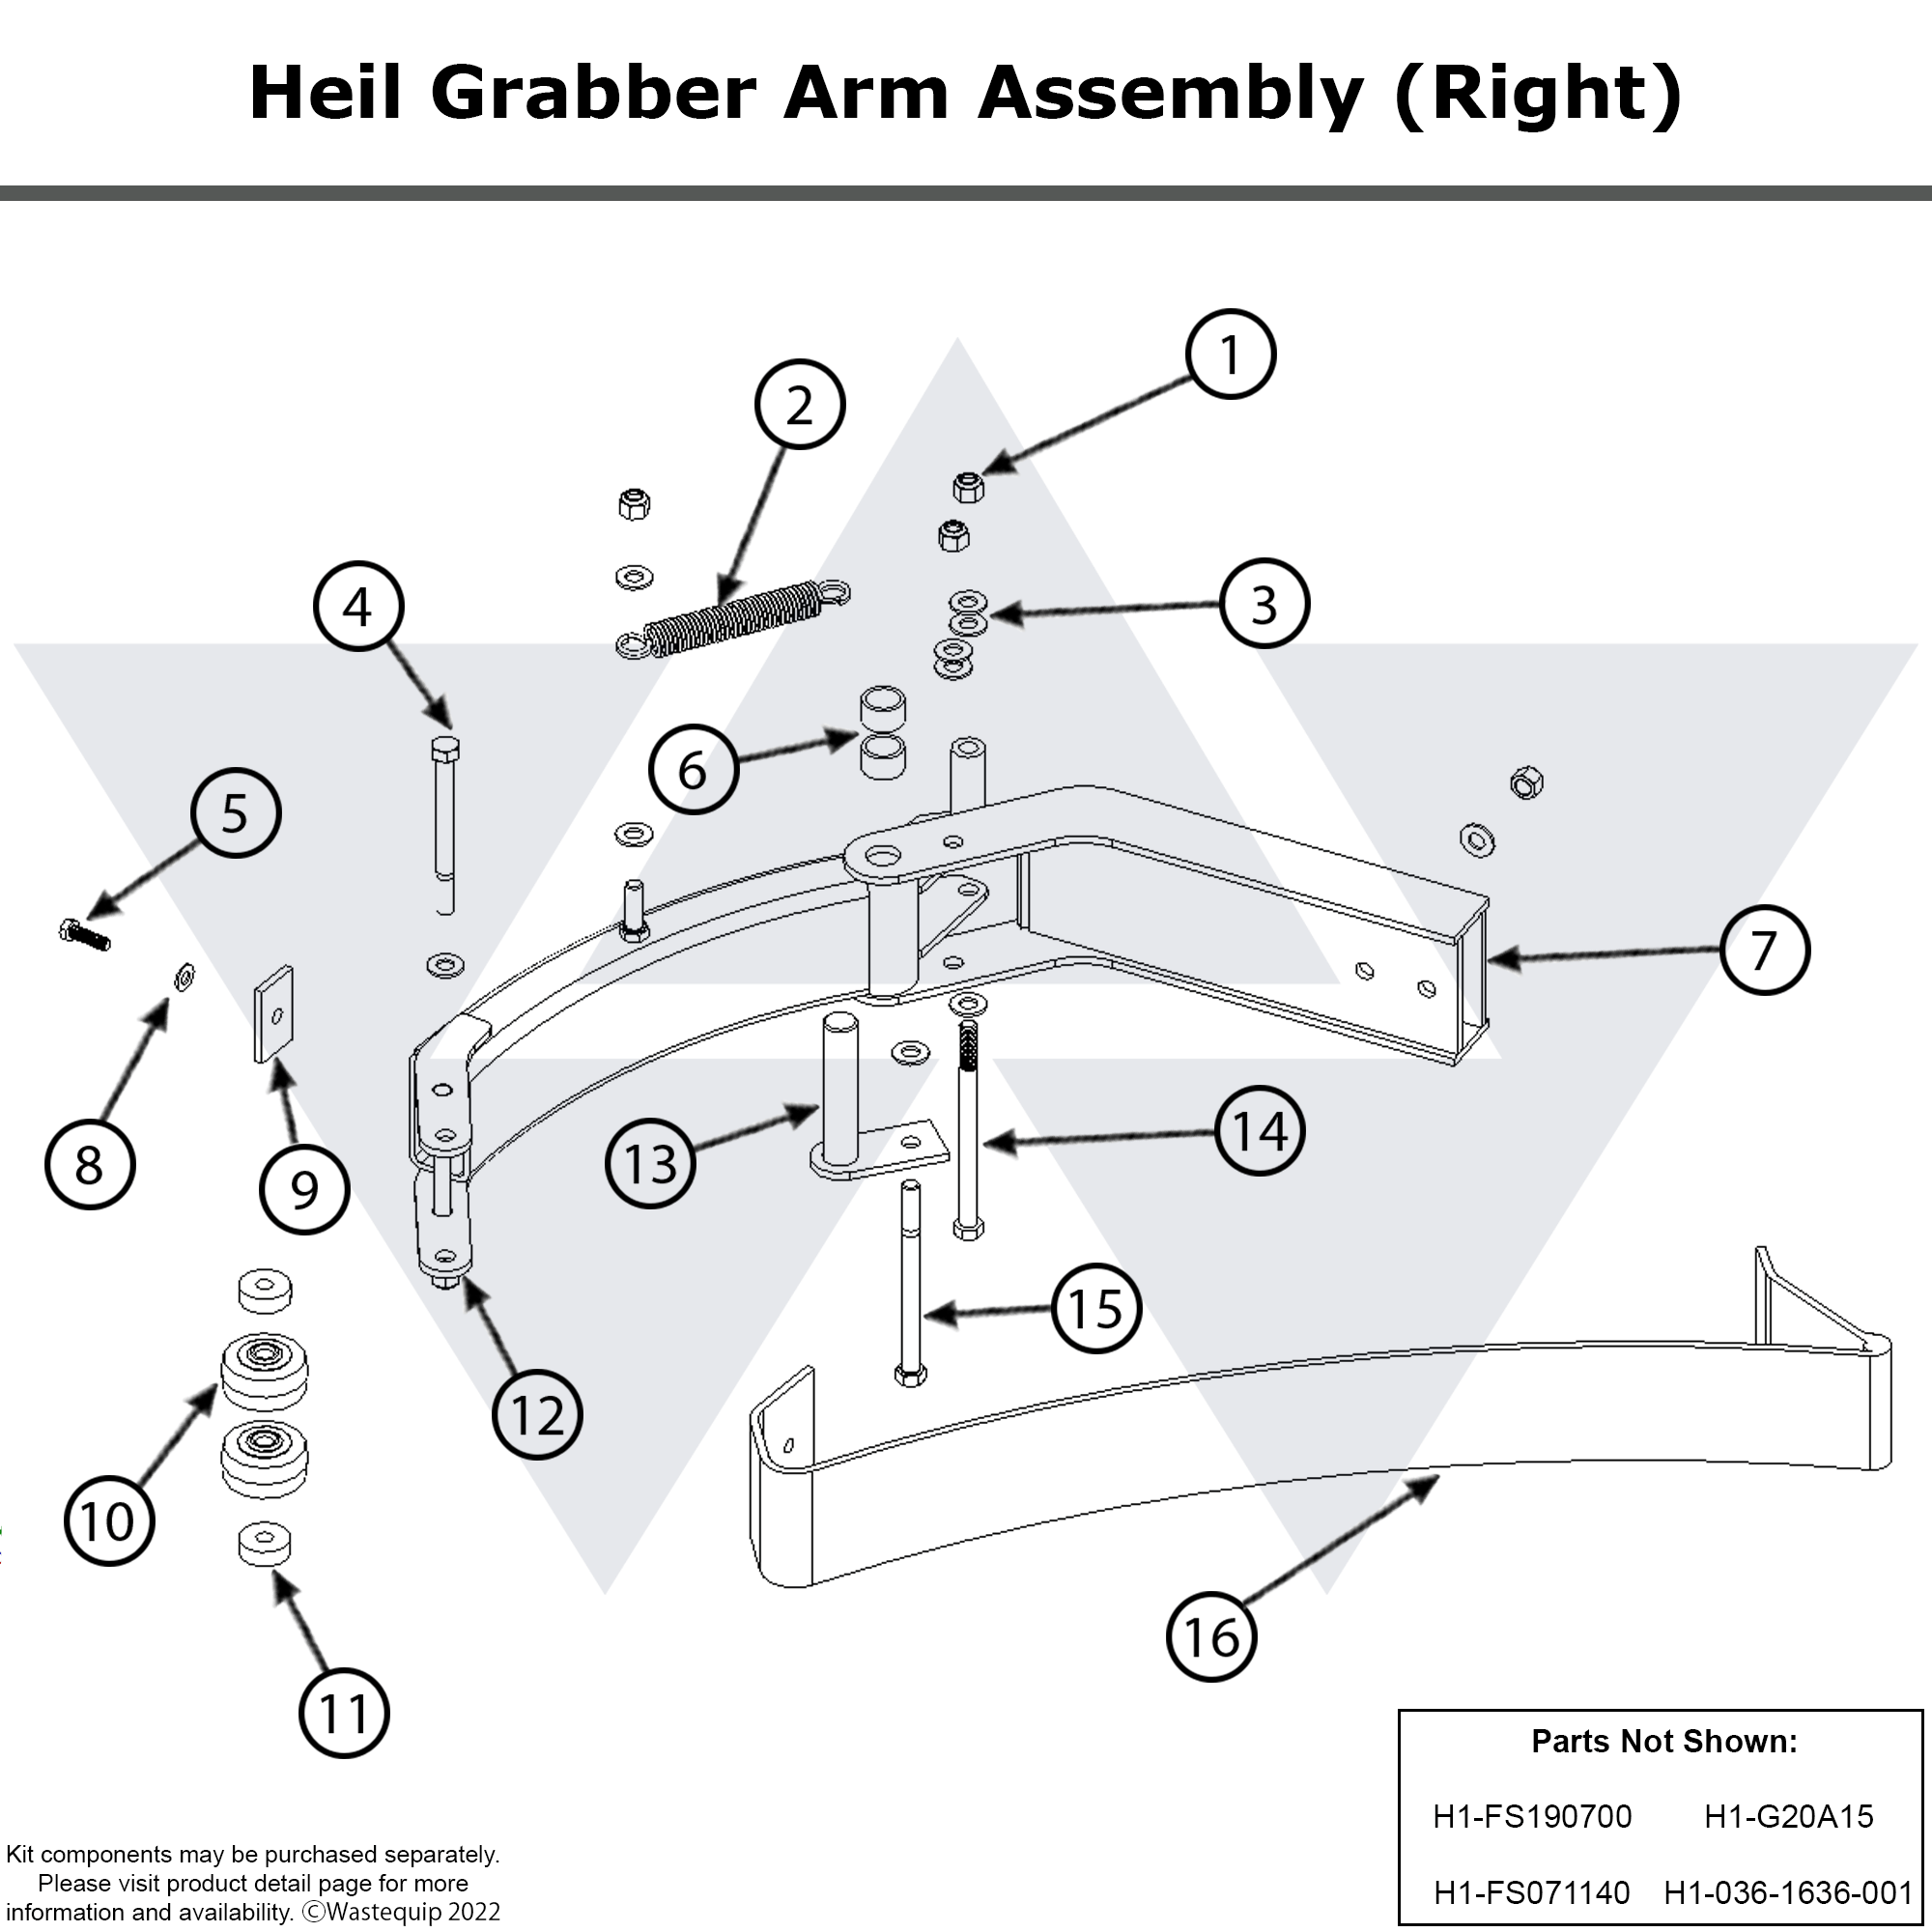 Wastebuilt® Replacement for Heil Grabber Arm Assembly Right